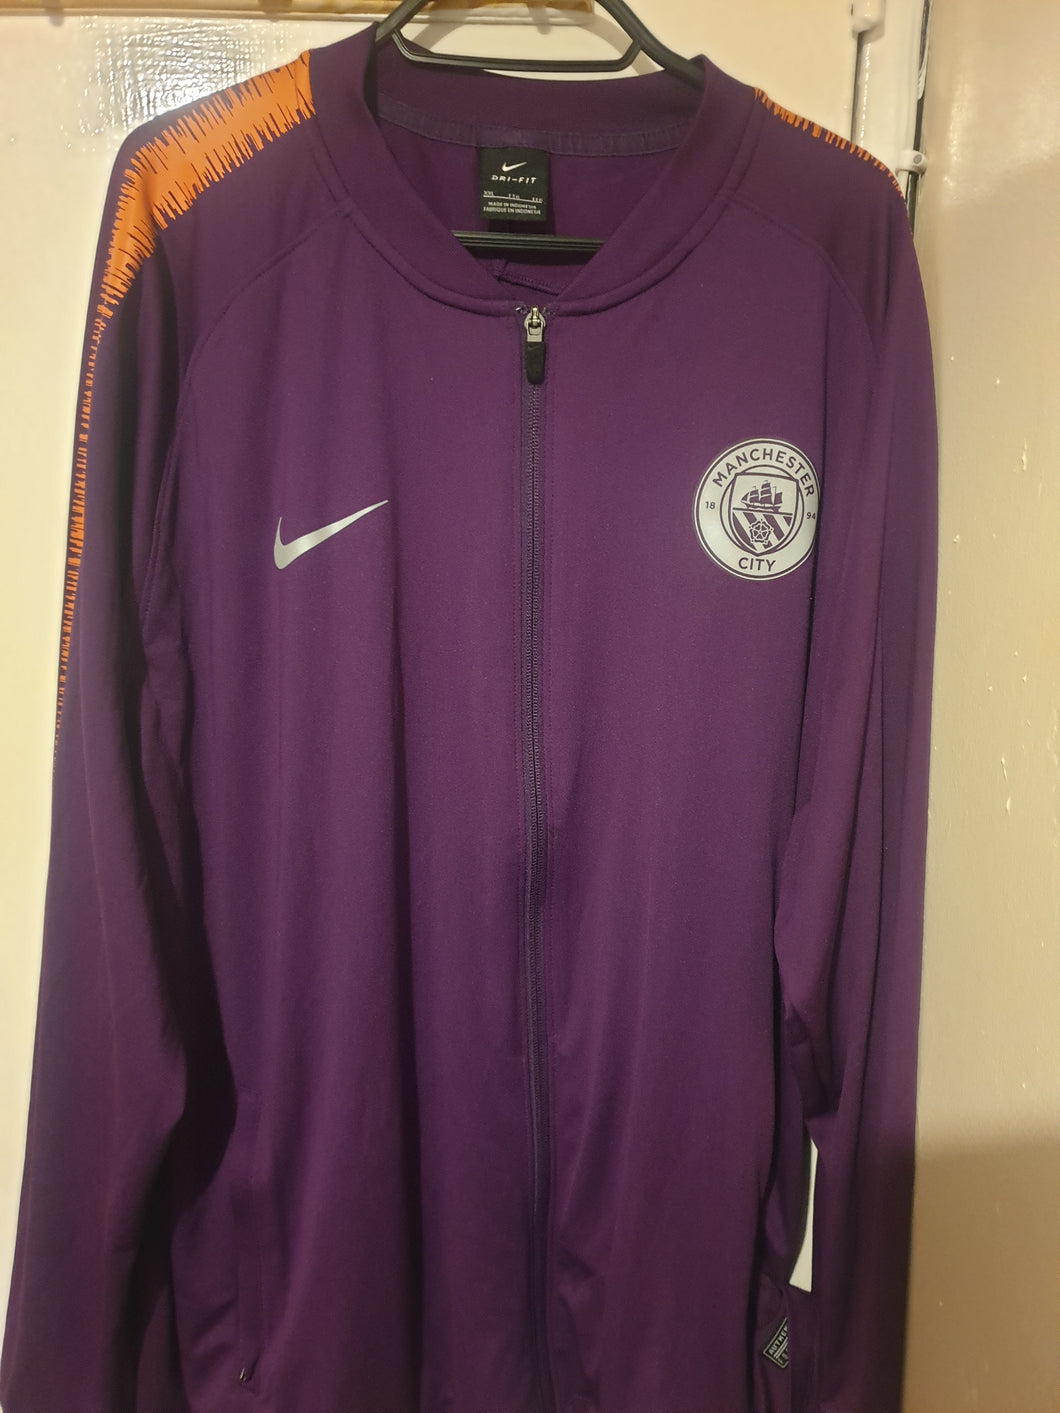 Manchester City 2018-19 Training Track Top (Size XXL)